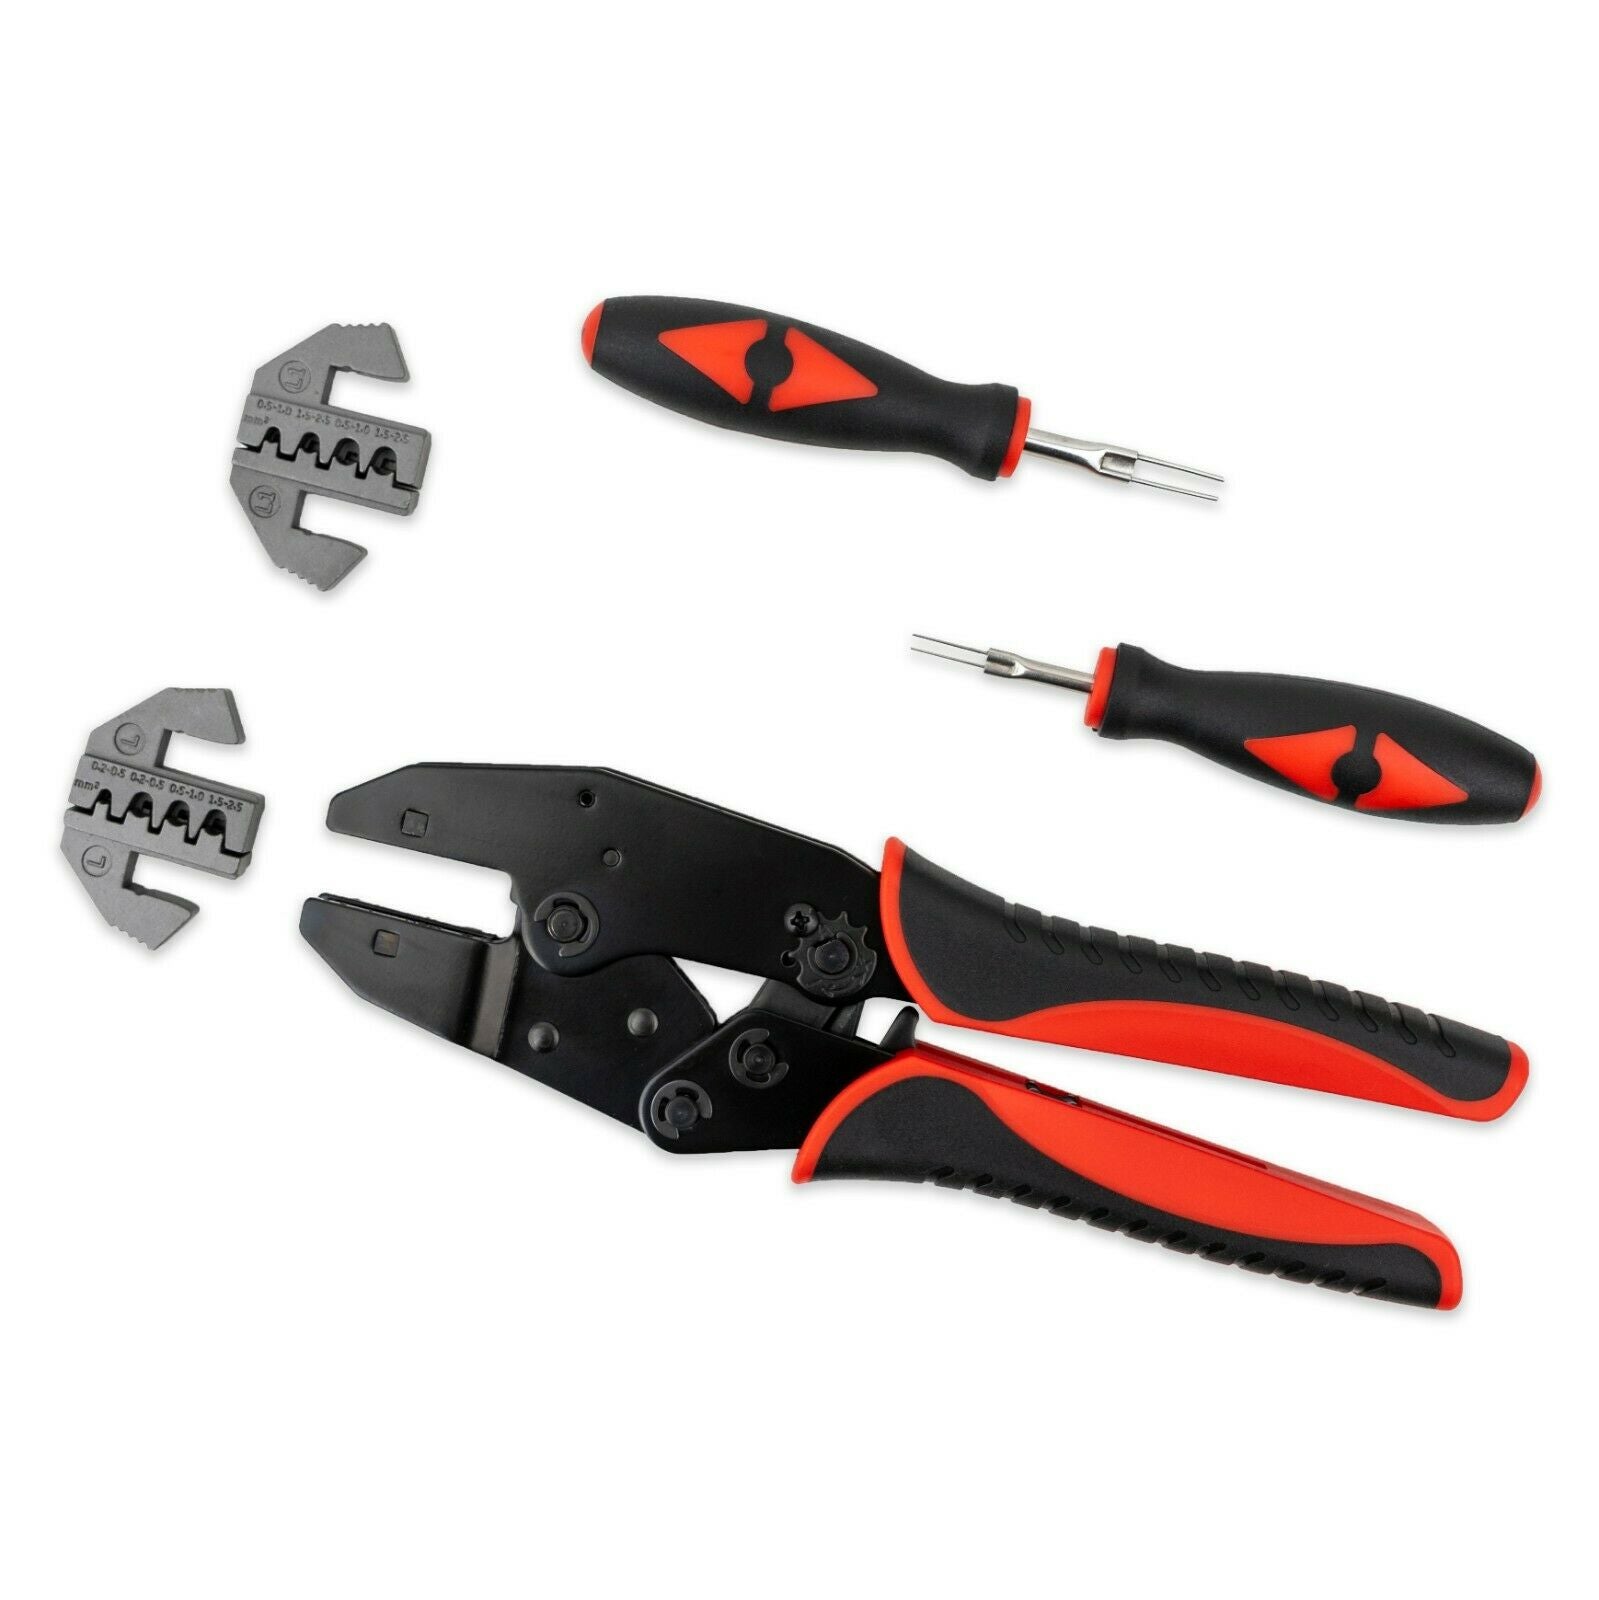 JPT & MCP Flat Connector Repair Kit - Ratcheting Terminal Crimper Set with Removal Tools (MAF, MAP, CTS, Oxygen Sensor, EV1 Injector Terminals) - Tool Guy Republic